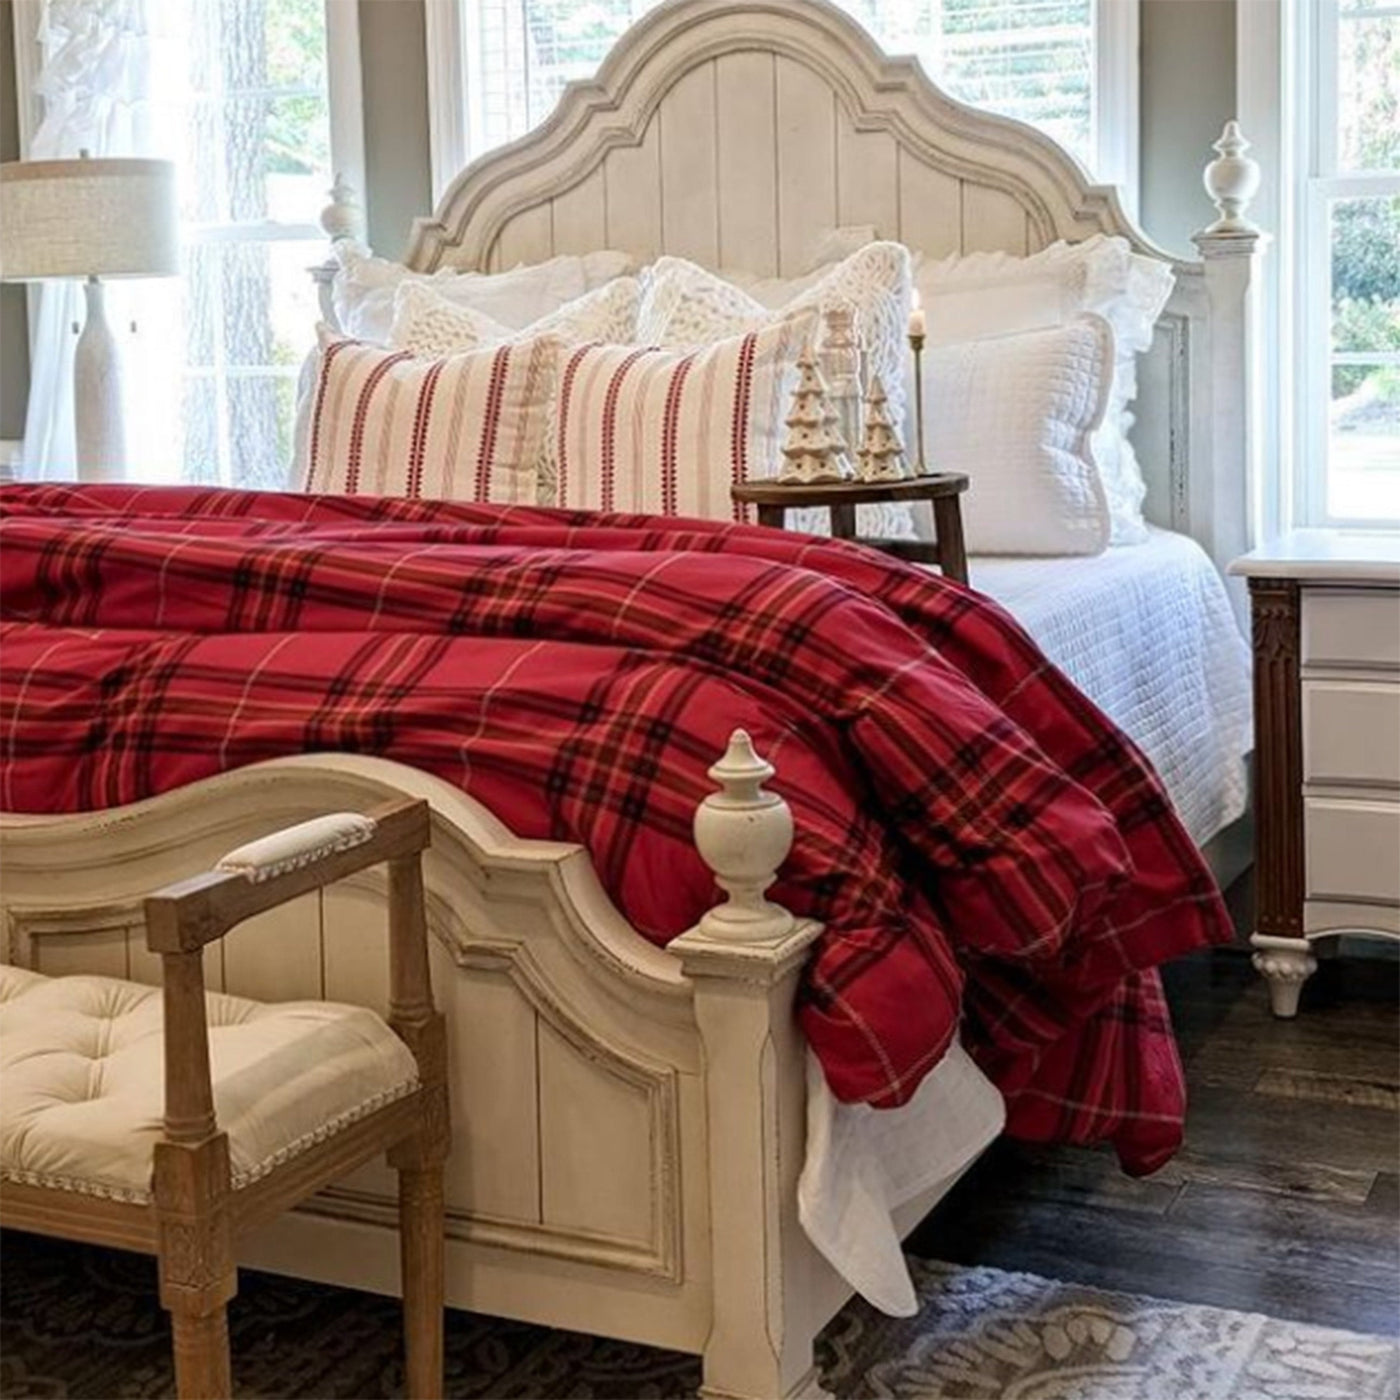 Side View of Vilano Plaid Comforter Set in Red#color_plaid-red